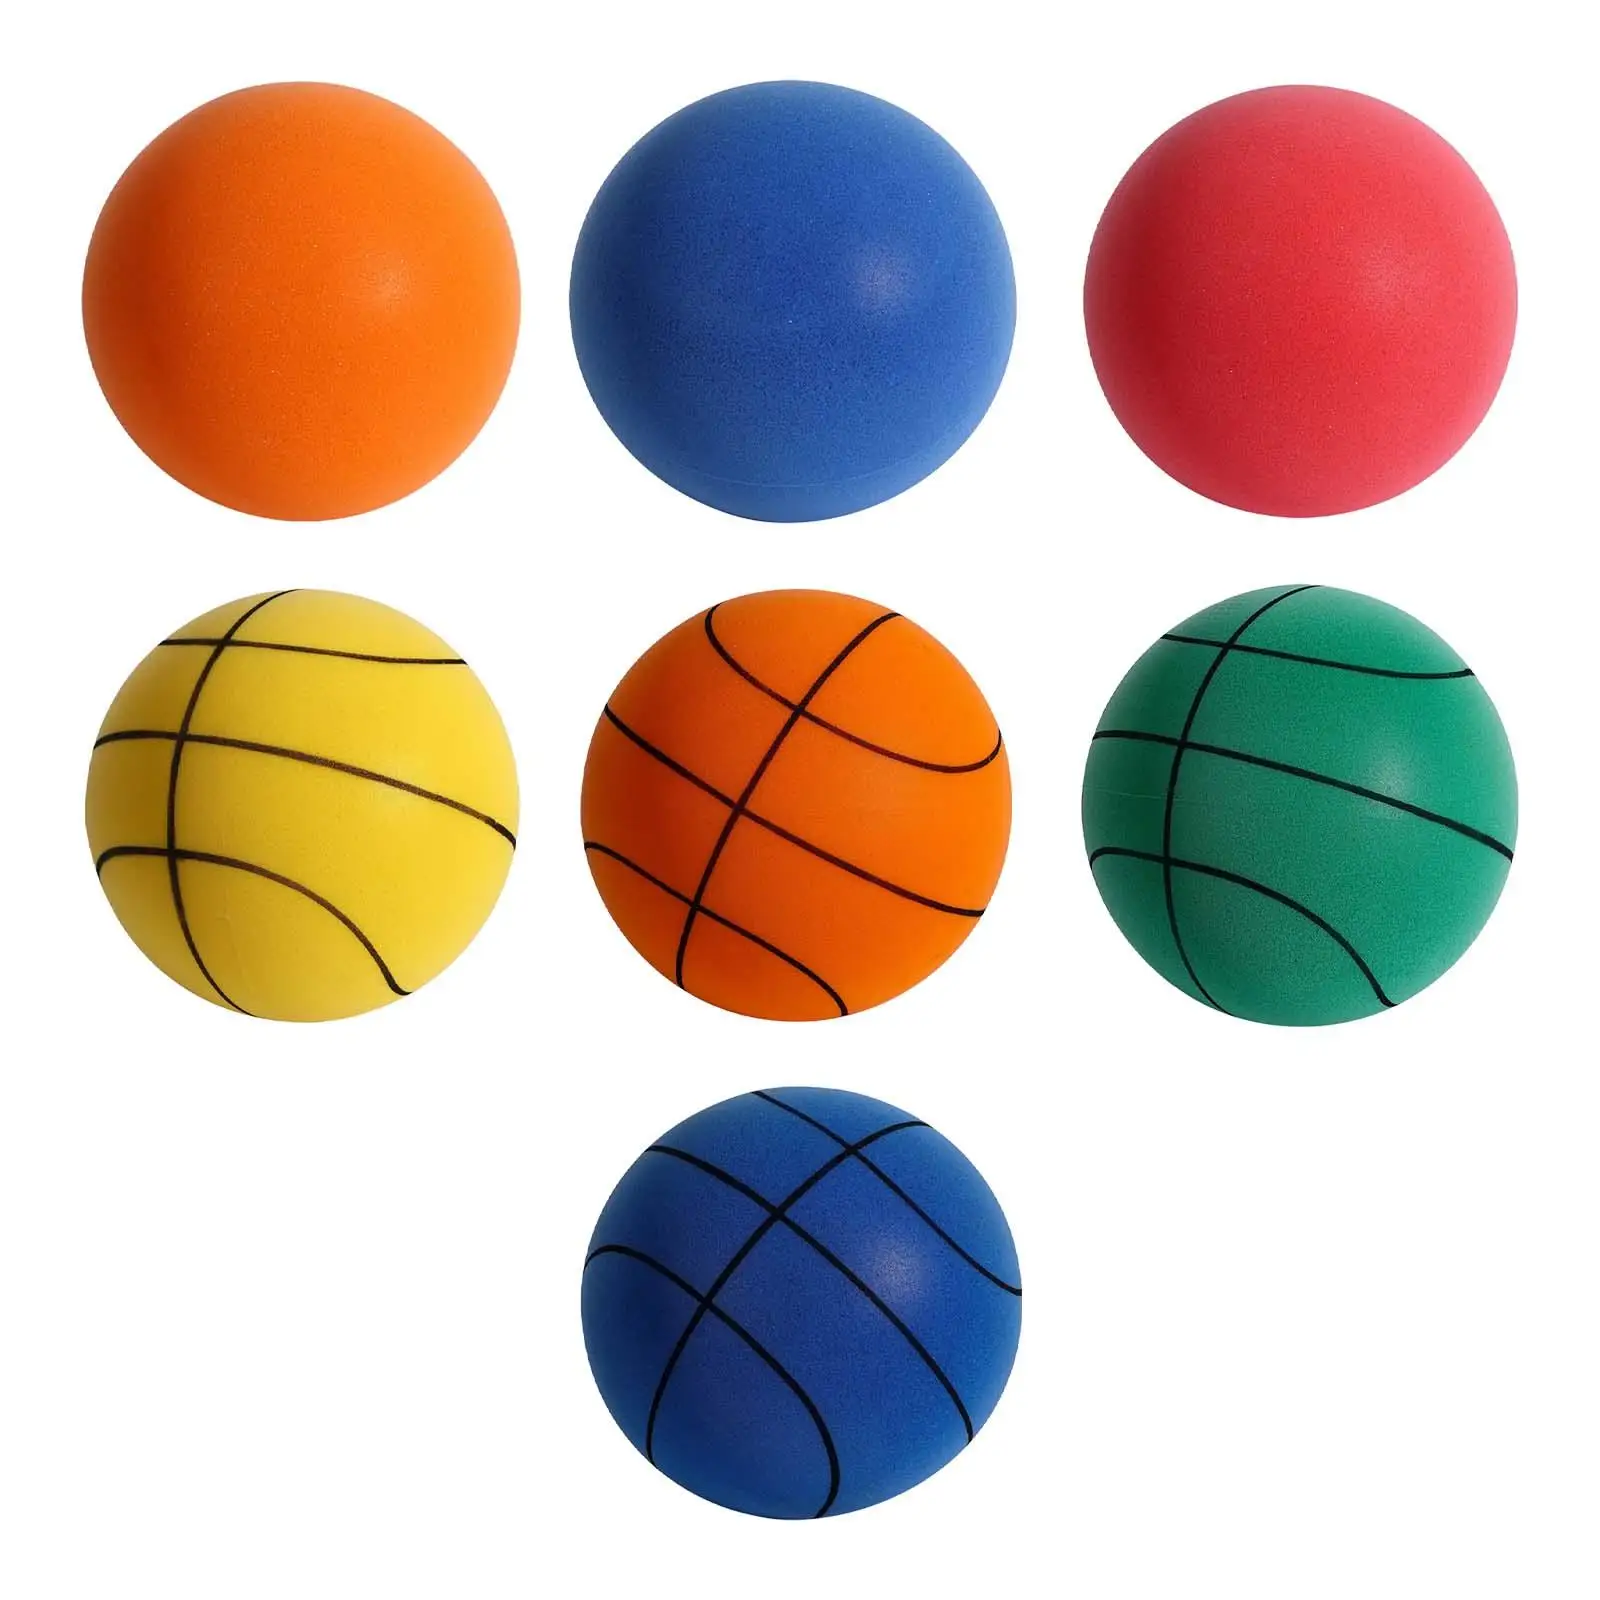 Educational Patting Ball Children Toy Balls for Halloween ChildrenS Day